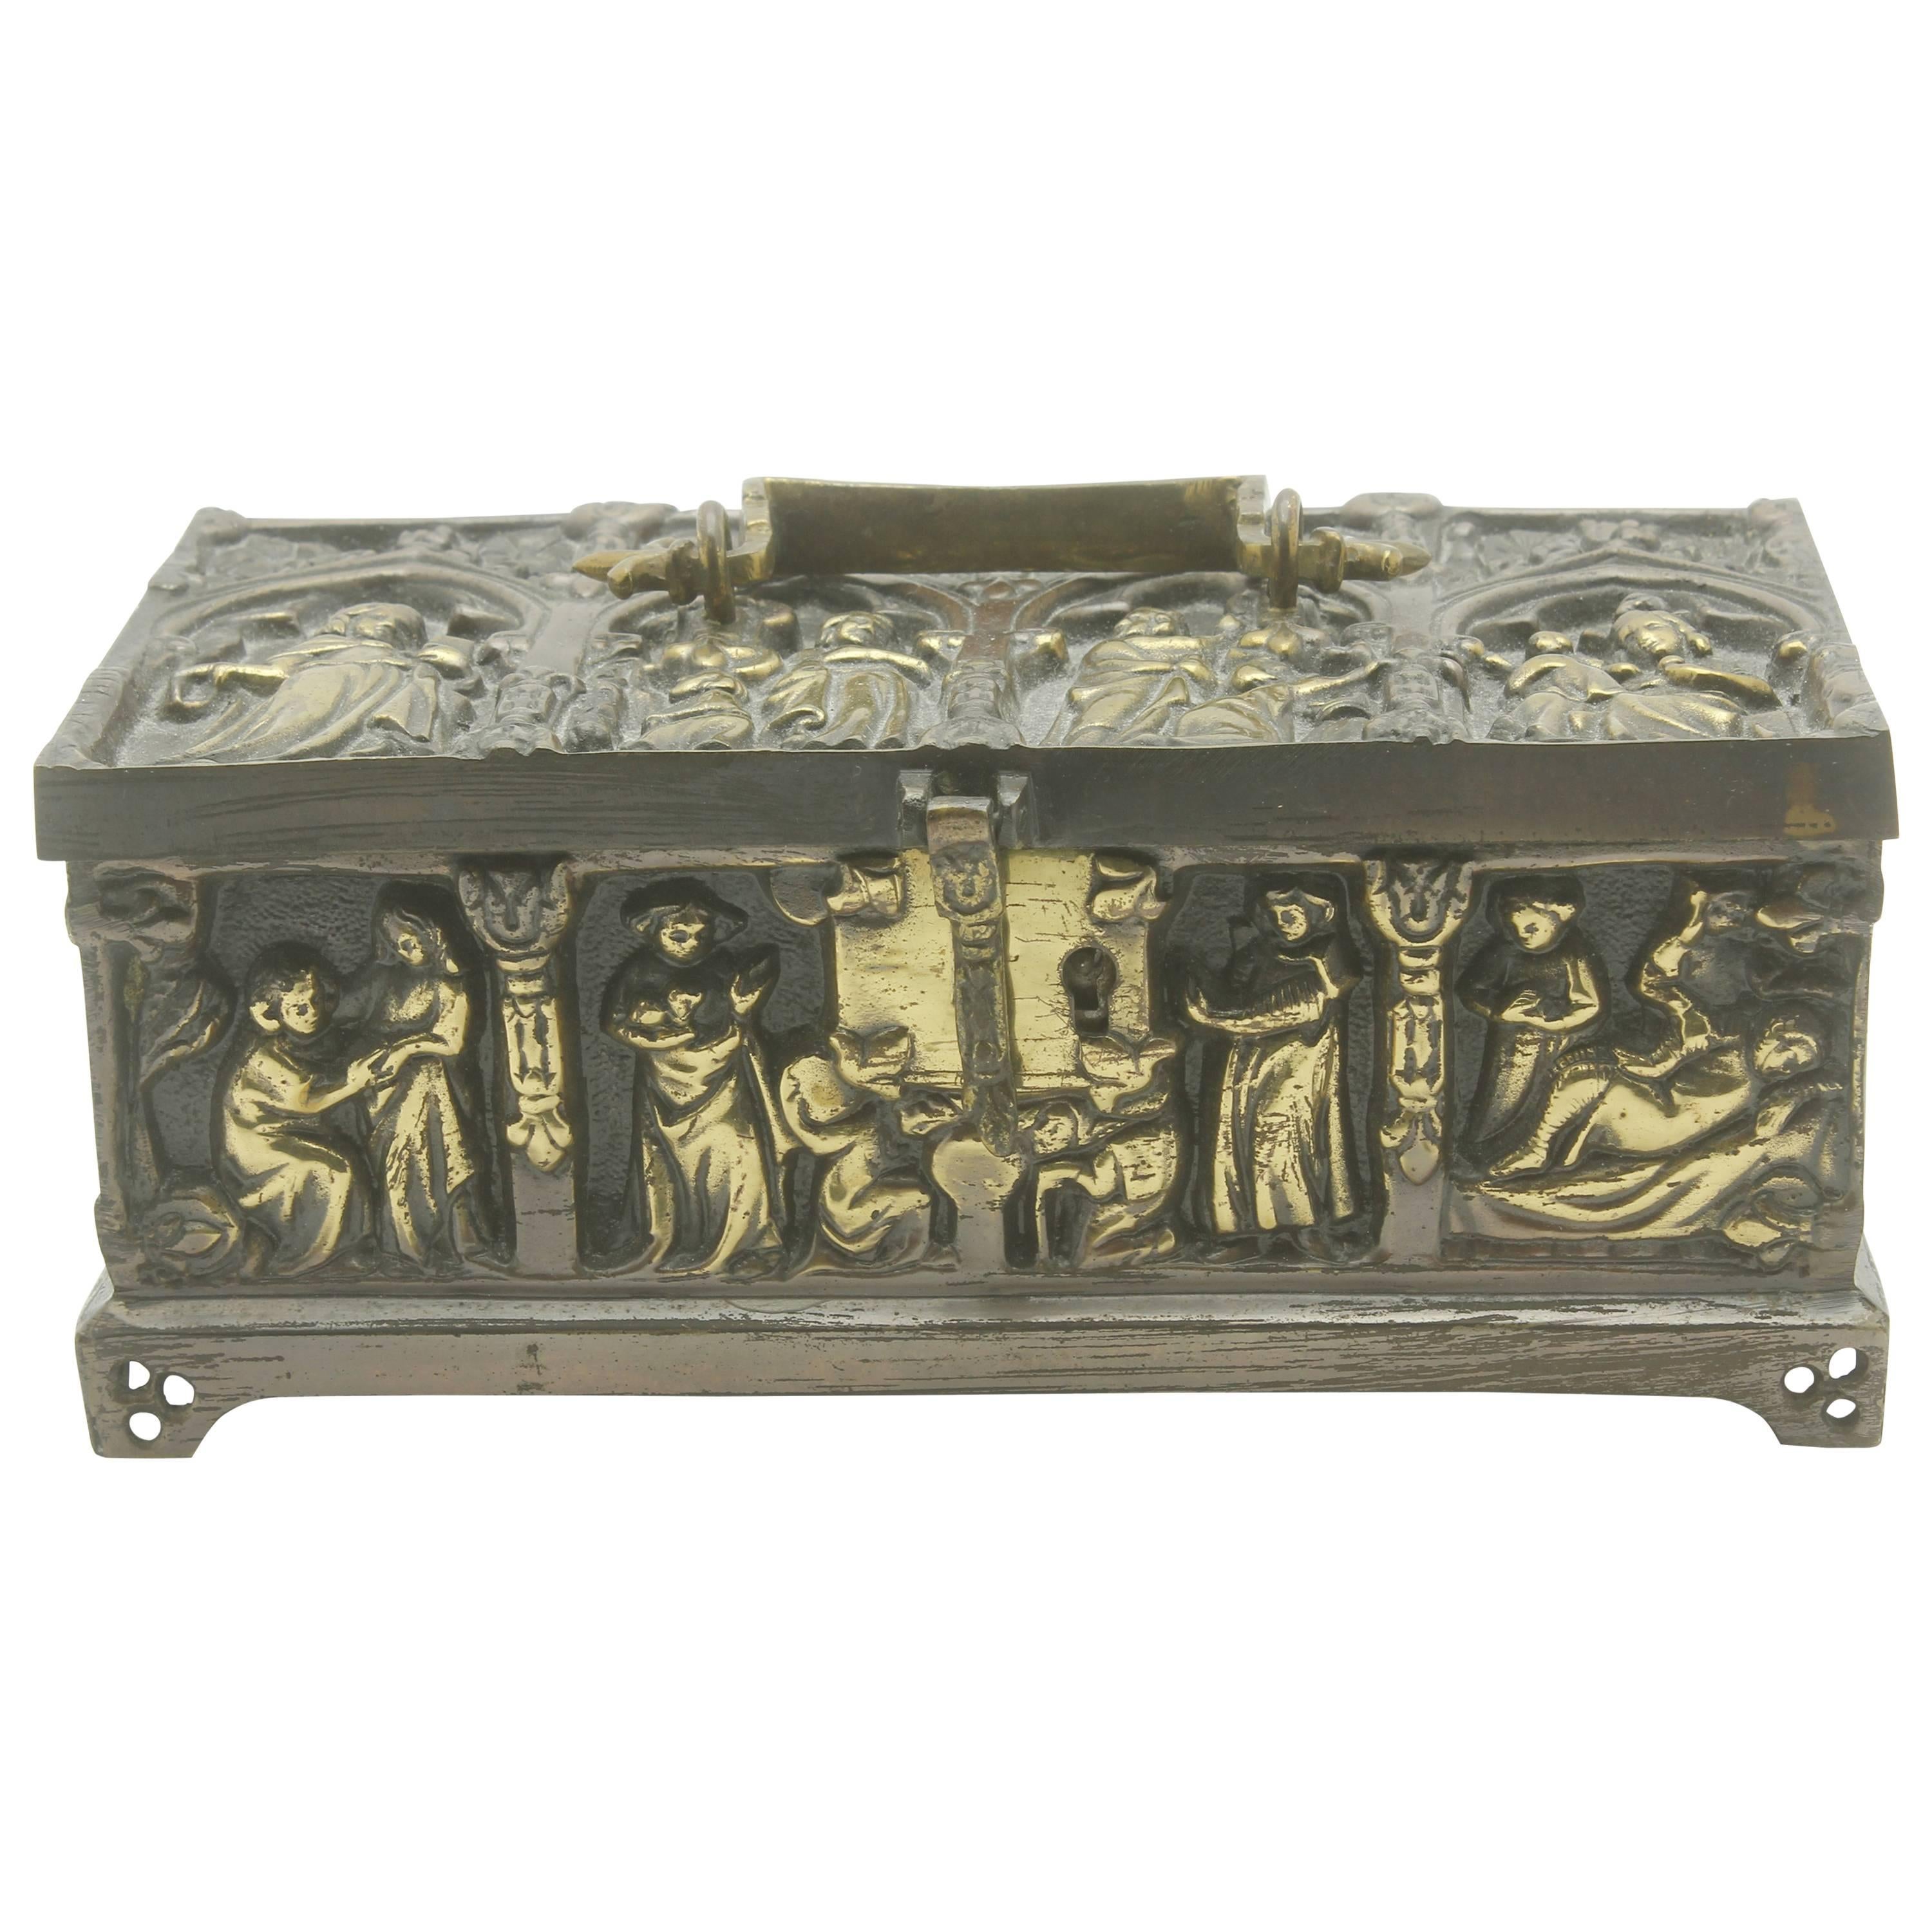 French Bronze Jewelry Casket, Cast Gilt Bronze and Panels of Medieval Scenes